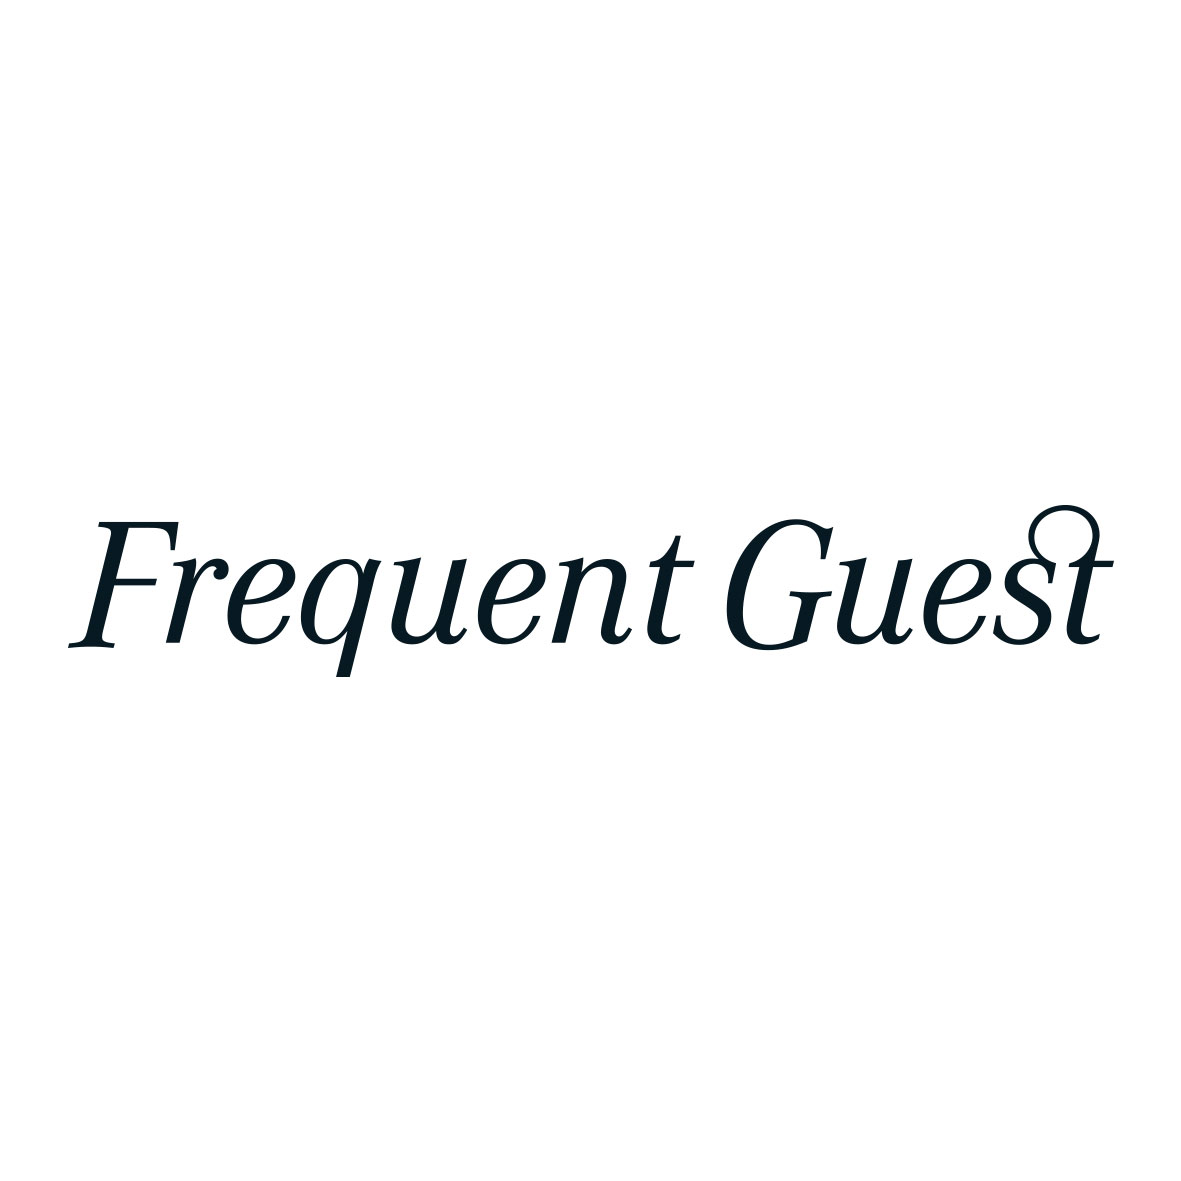 Logo_FrequentGuest_Square